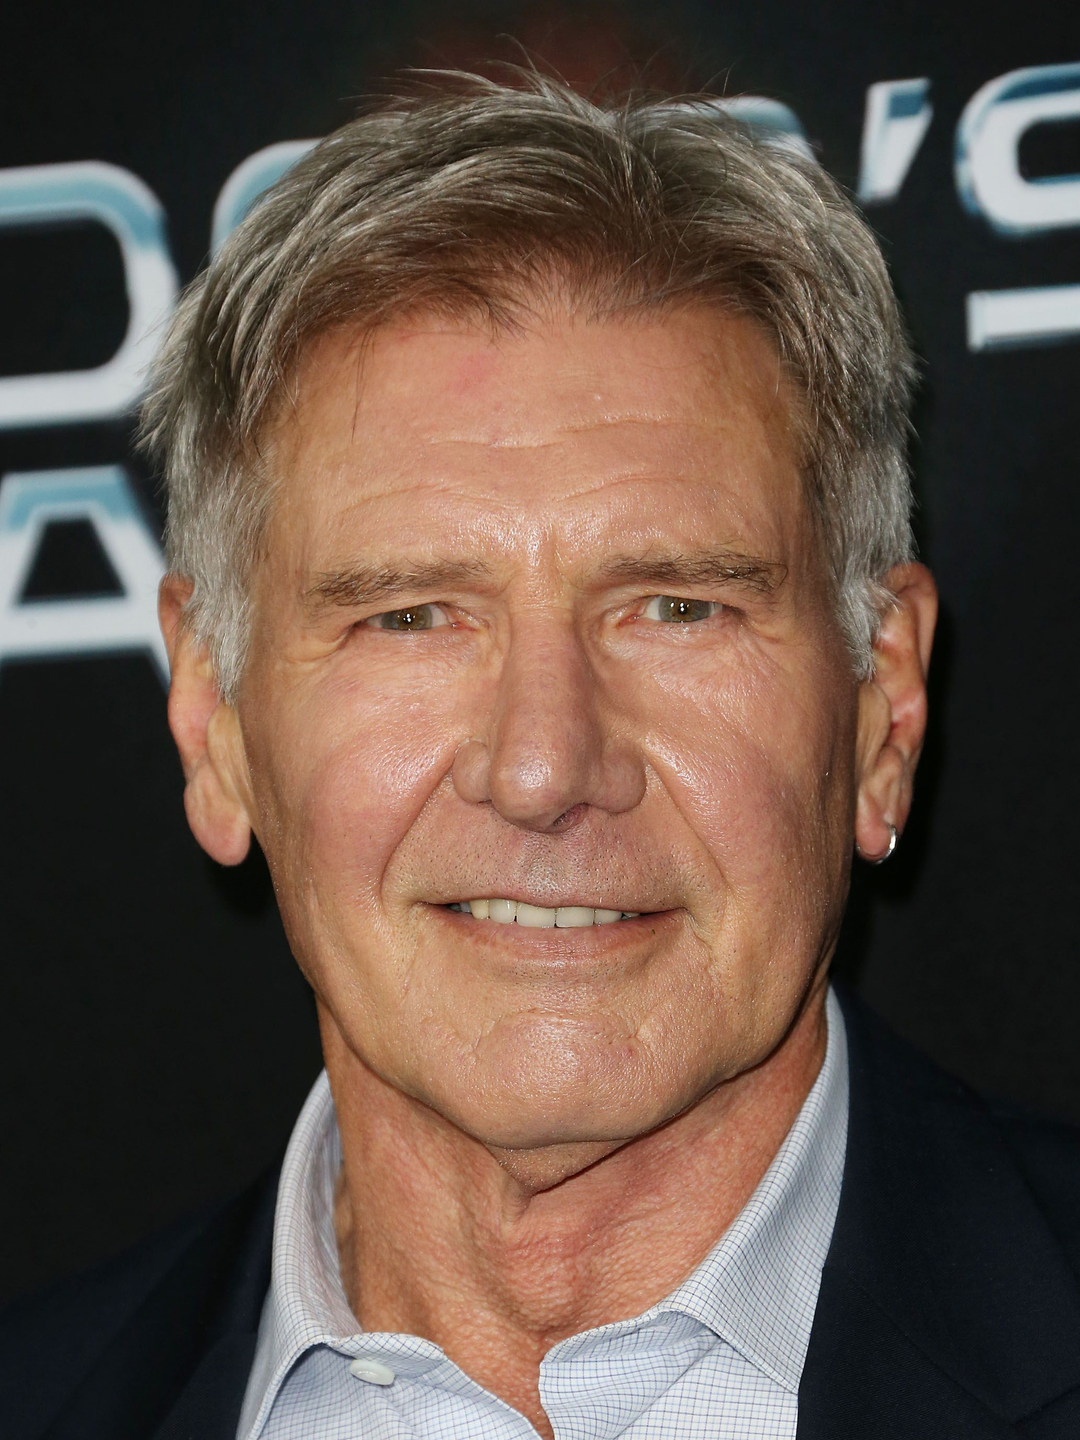 Harrison Ford early life